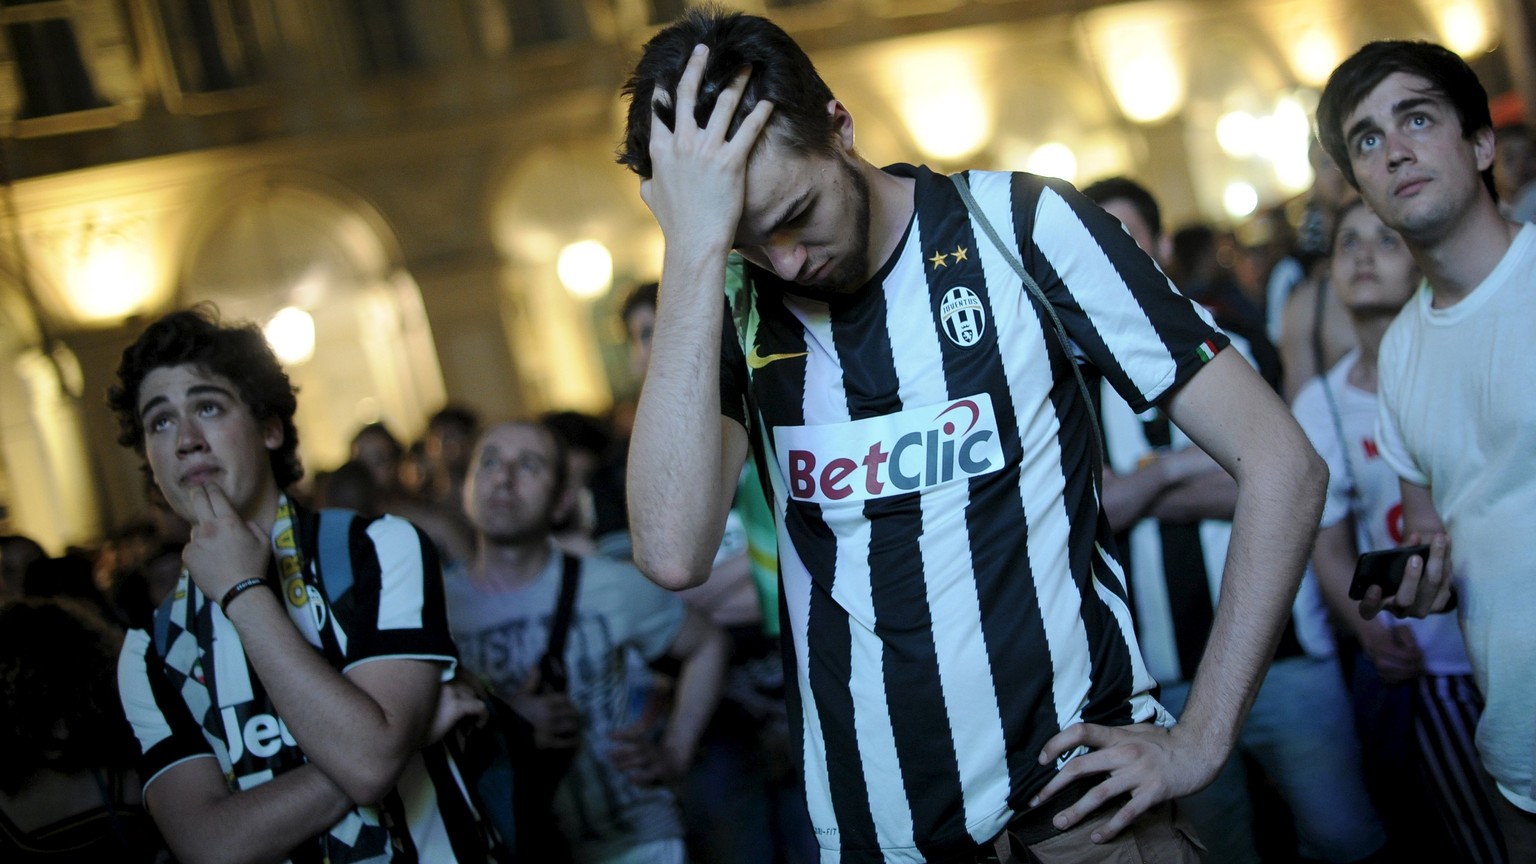 Juventus fans react at the end of their Champions League final match against Barcelona as they watch a live telecast, in Turin June 6, 2015. Barcelona won the Champions league final match.
REUTERS/Gio ...